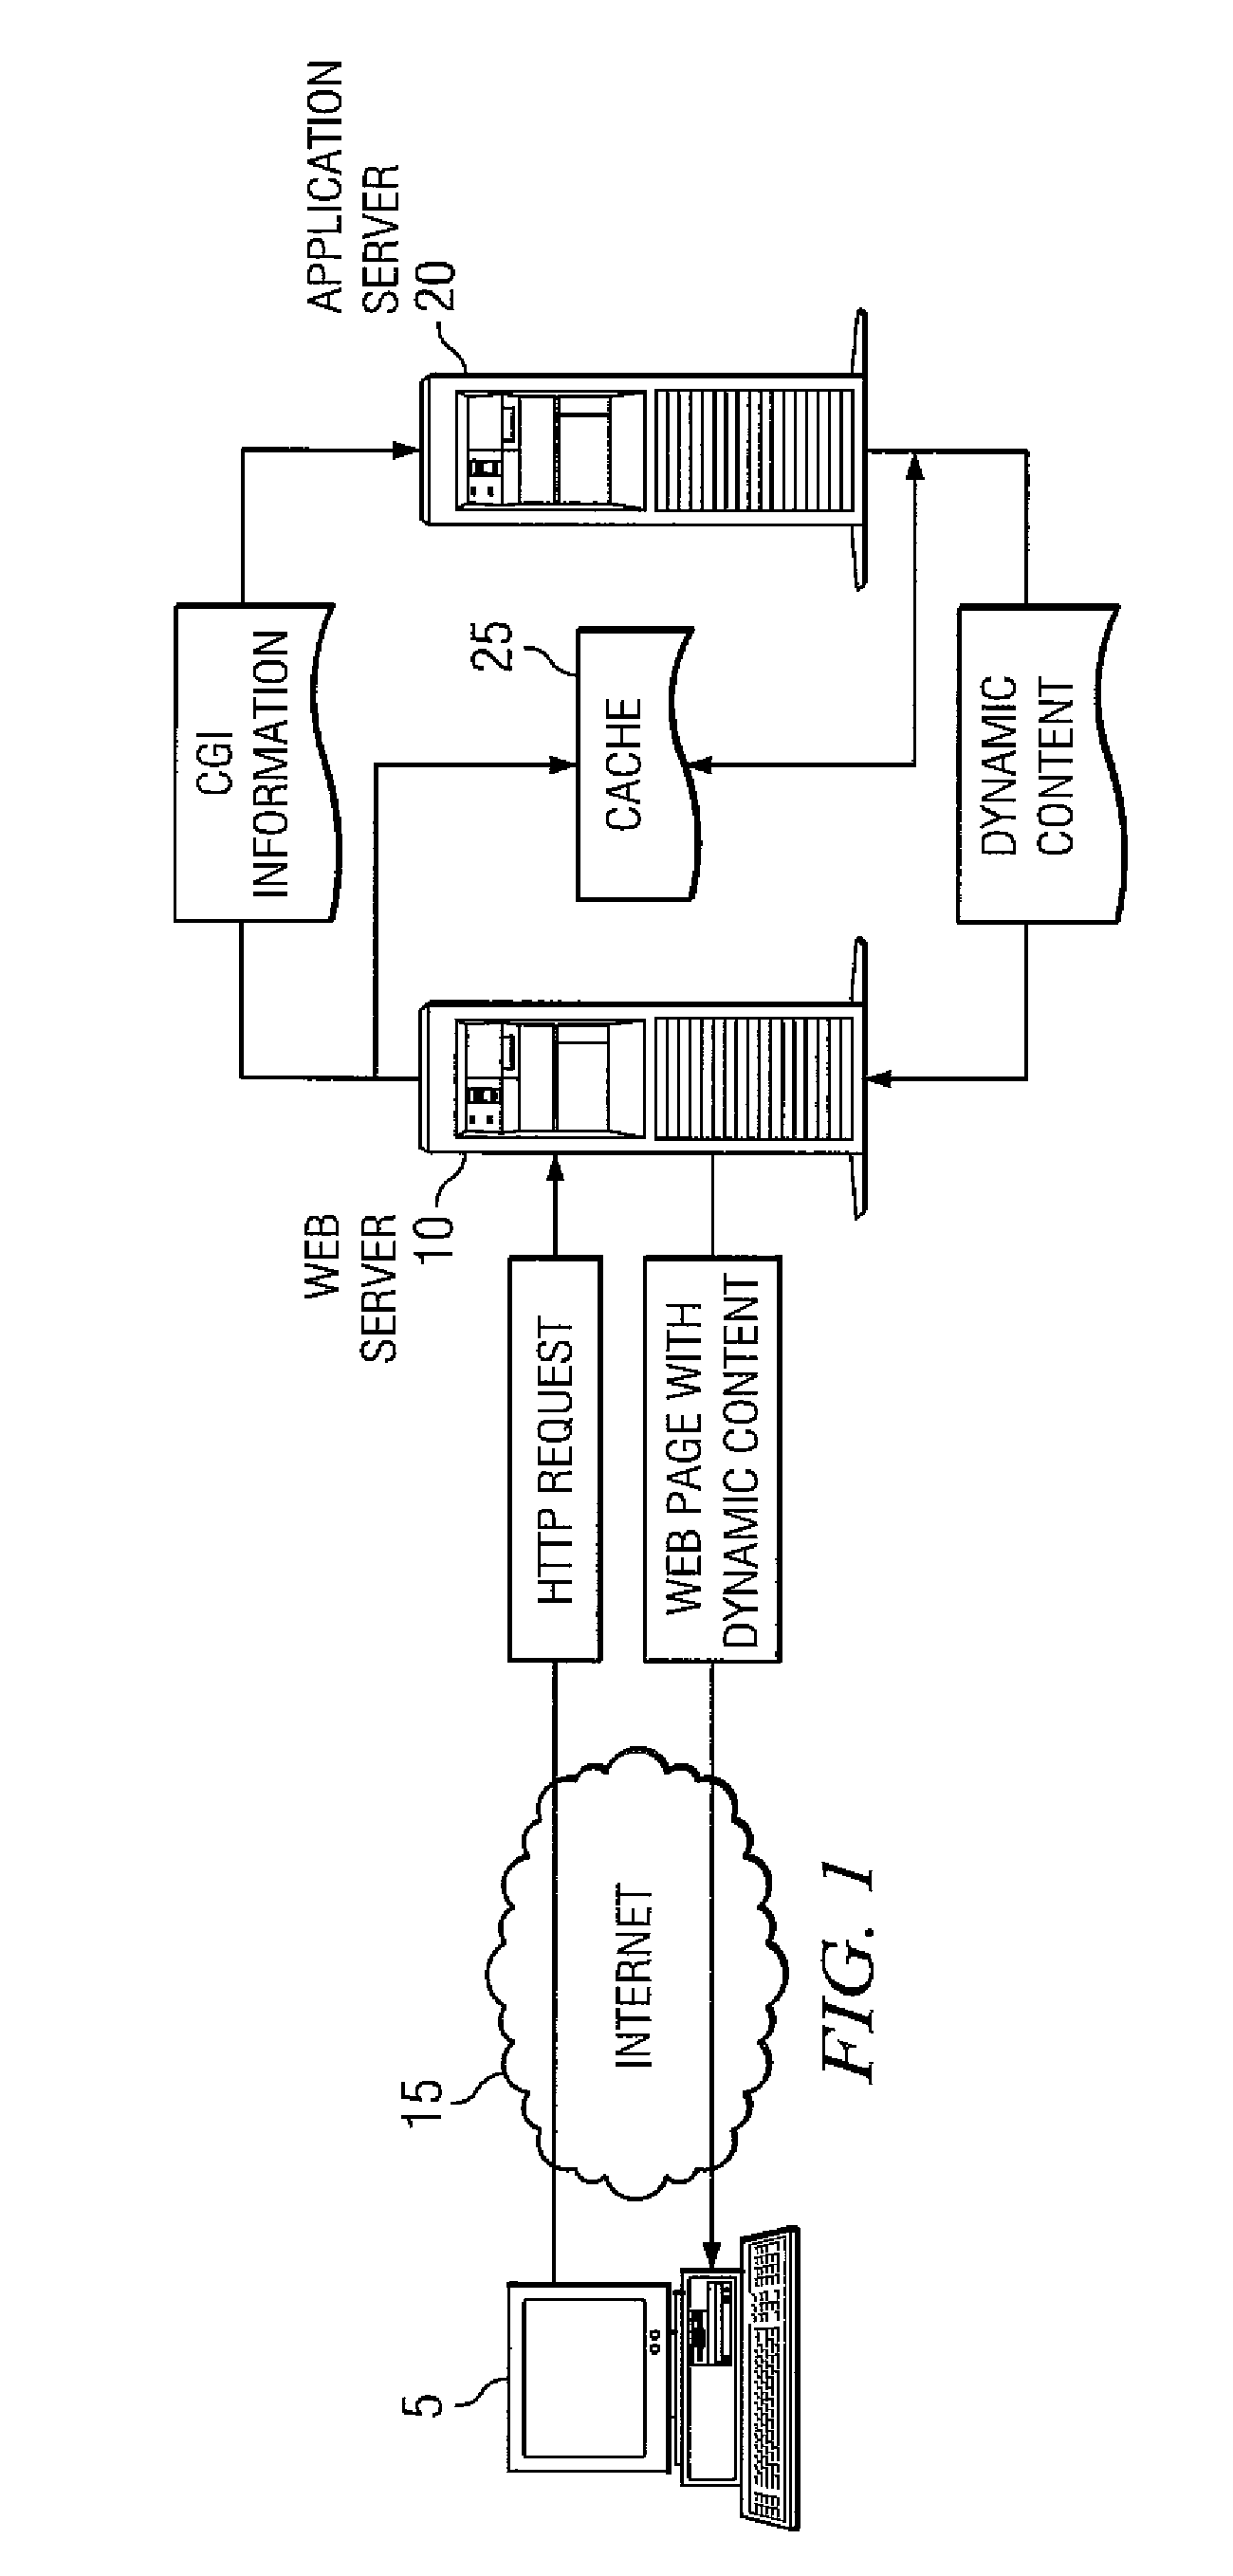 Method and system for cache management